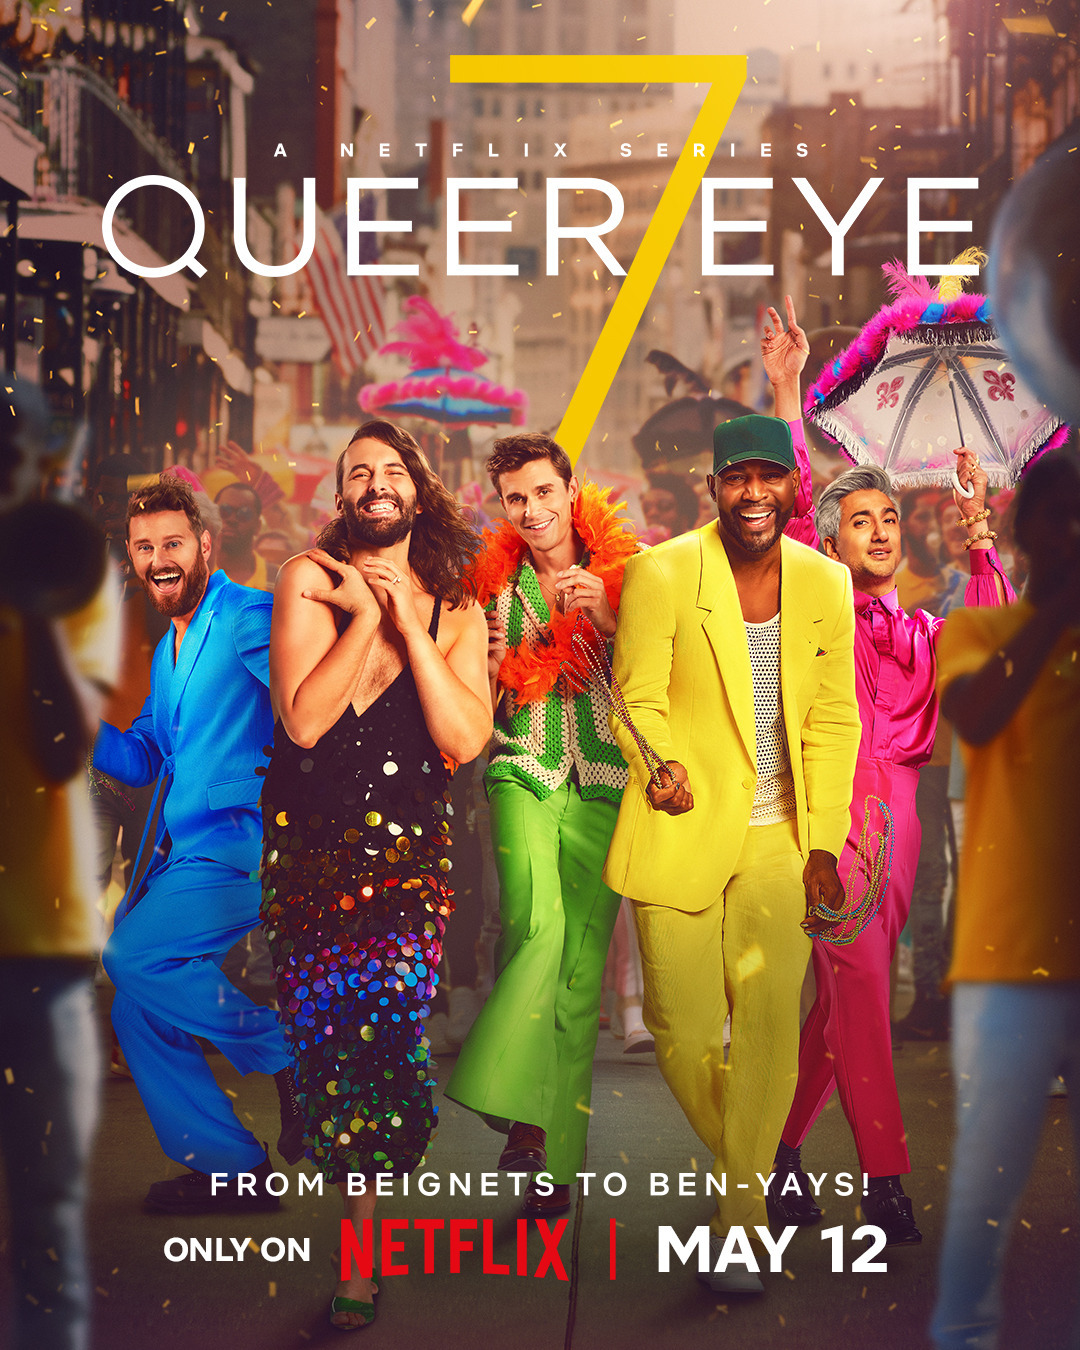 Extra Large TV Poster Image for Queer Eye (#5 of 6)